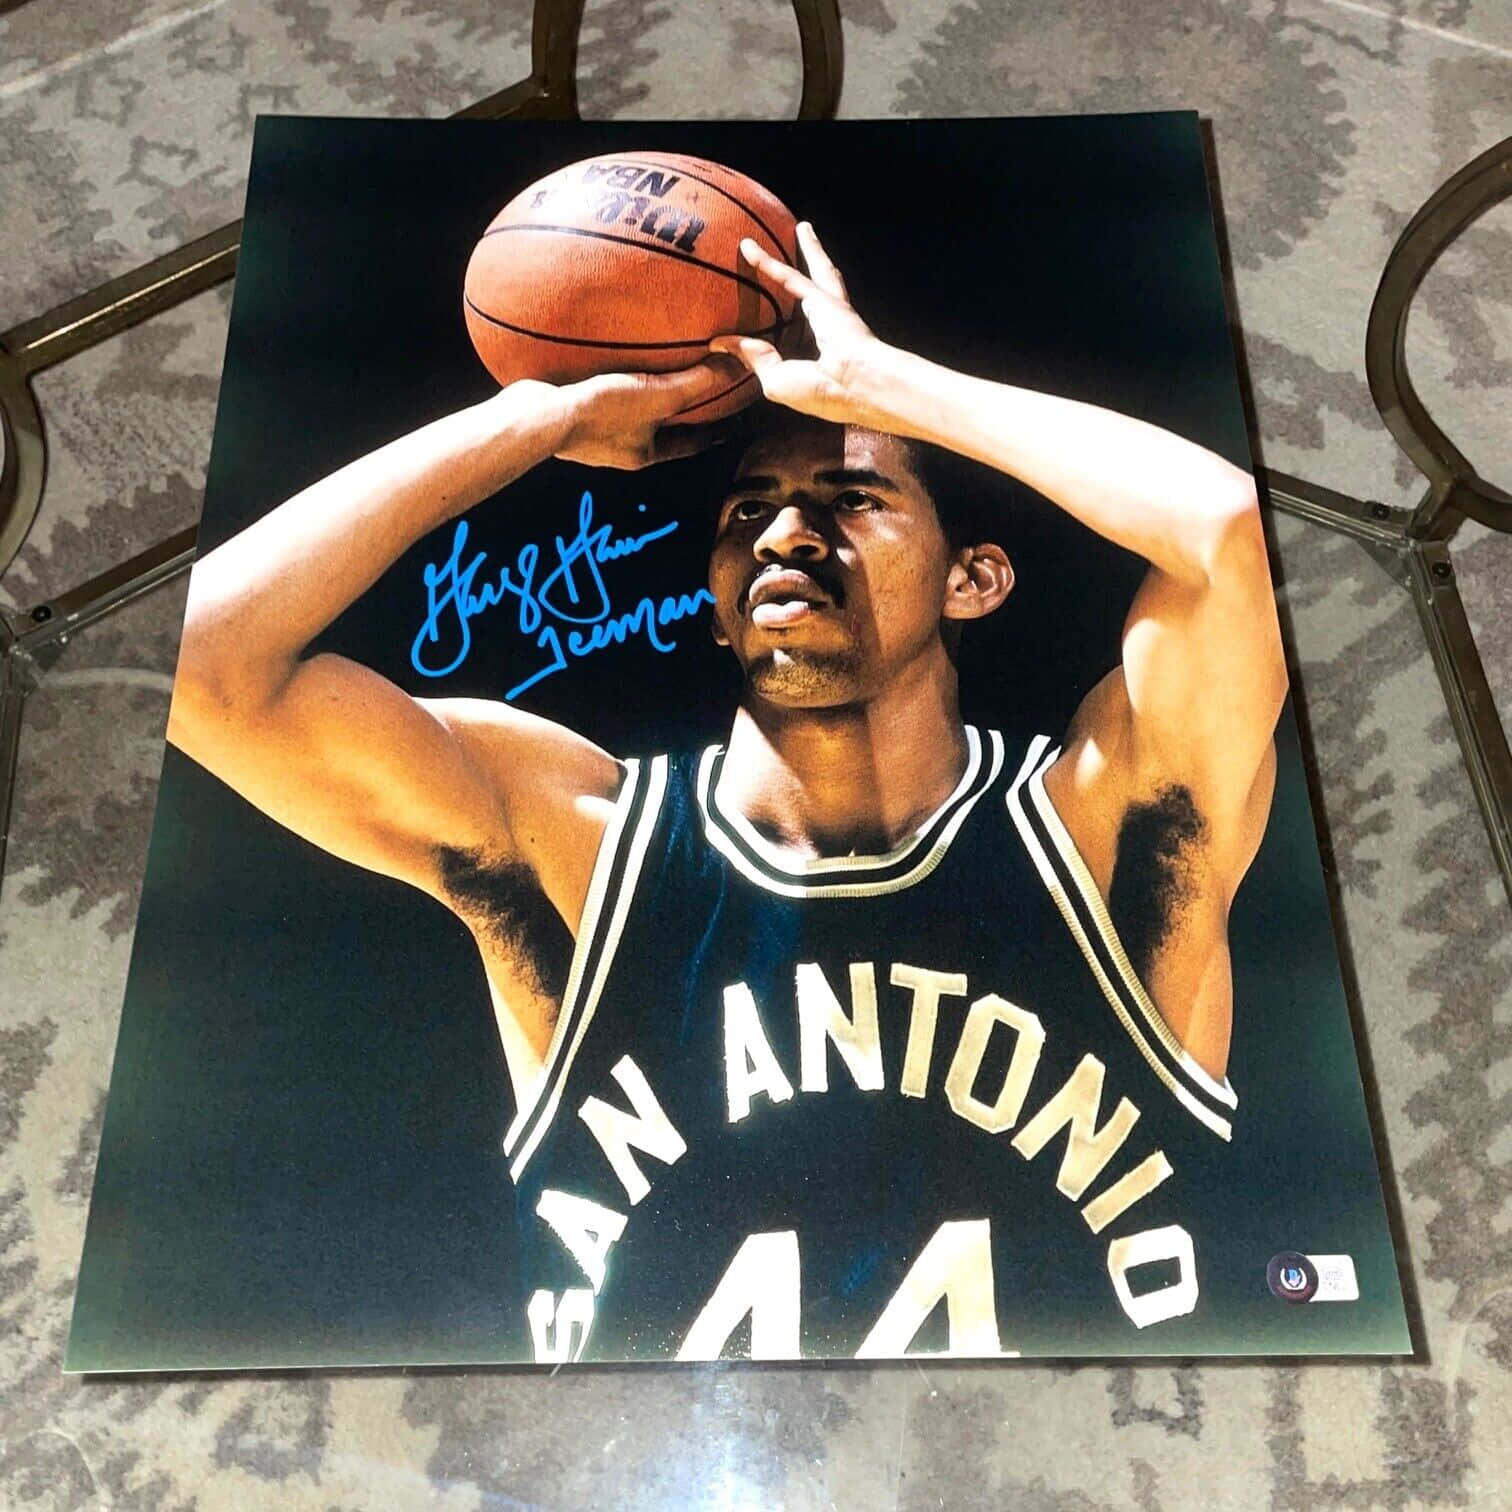 Georgegervin Cool Autograph Poster - George Gervin Cool Autograf Poster Wallpaper